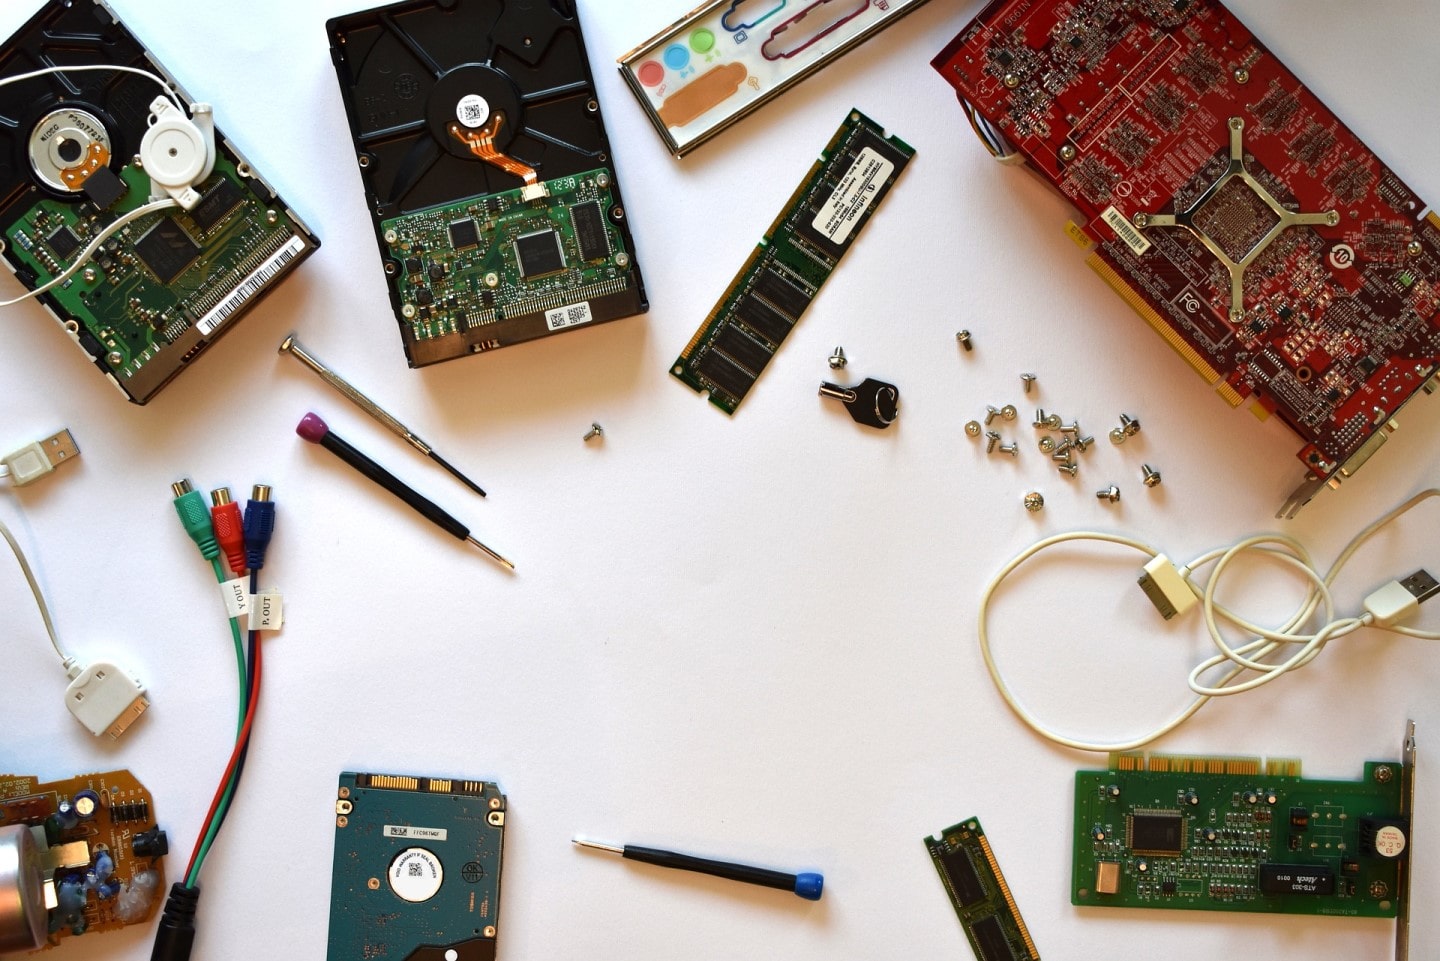 Run hardware diagnostics or tests provided by your manufacturer
If any hardware issues are detected, consult a professional technician for repair or replacement